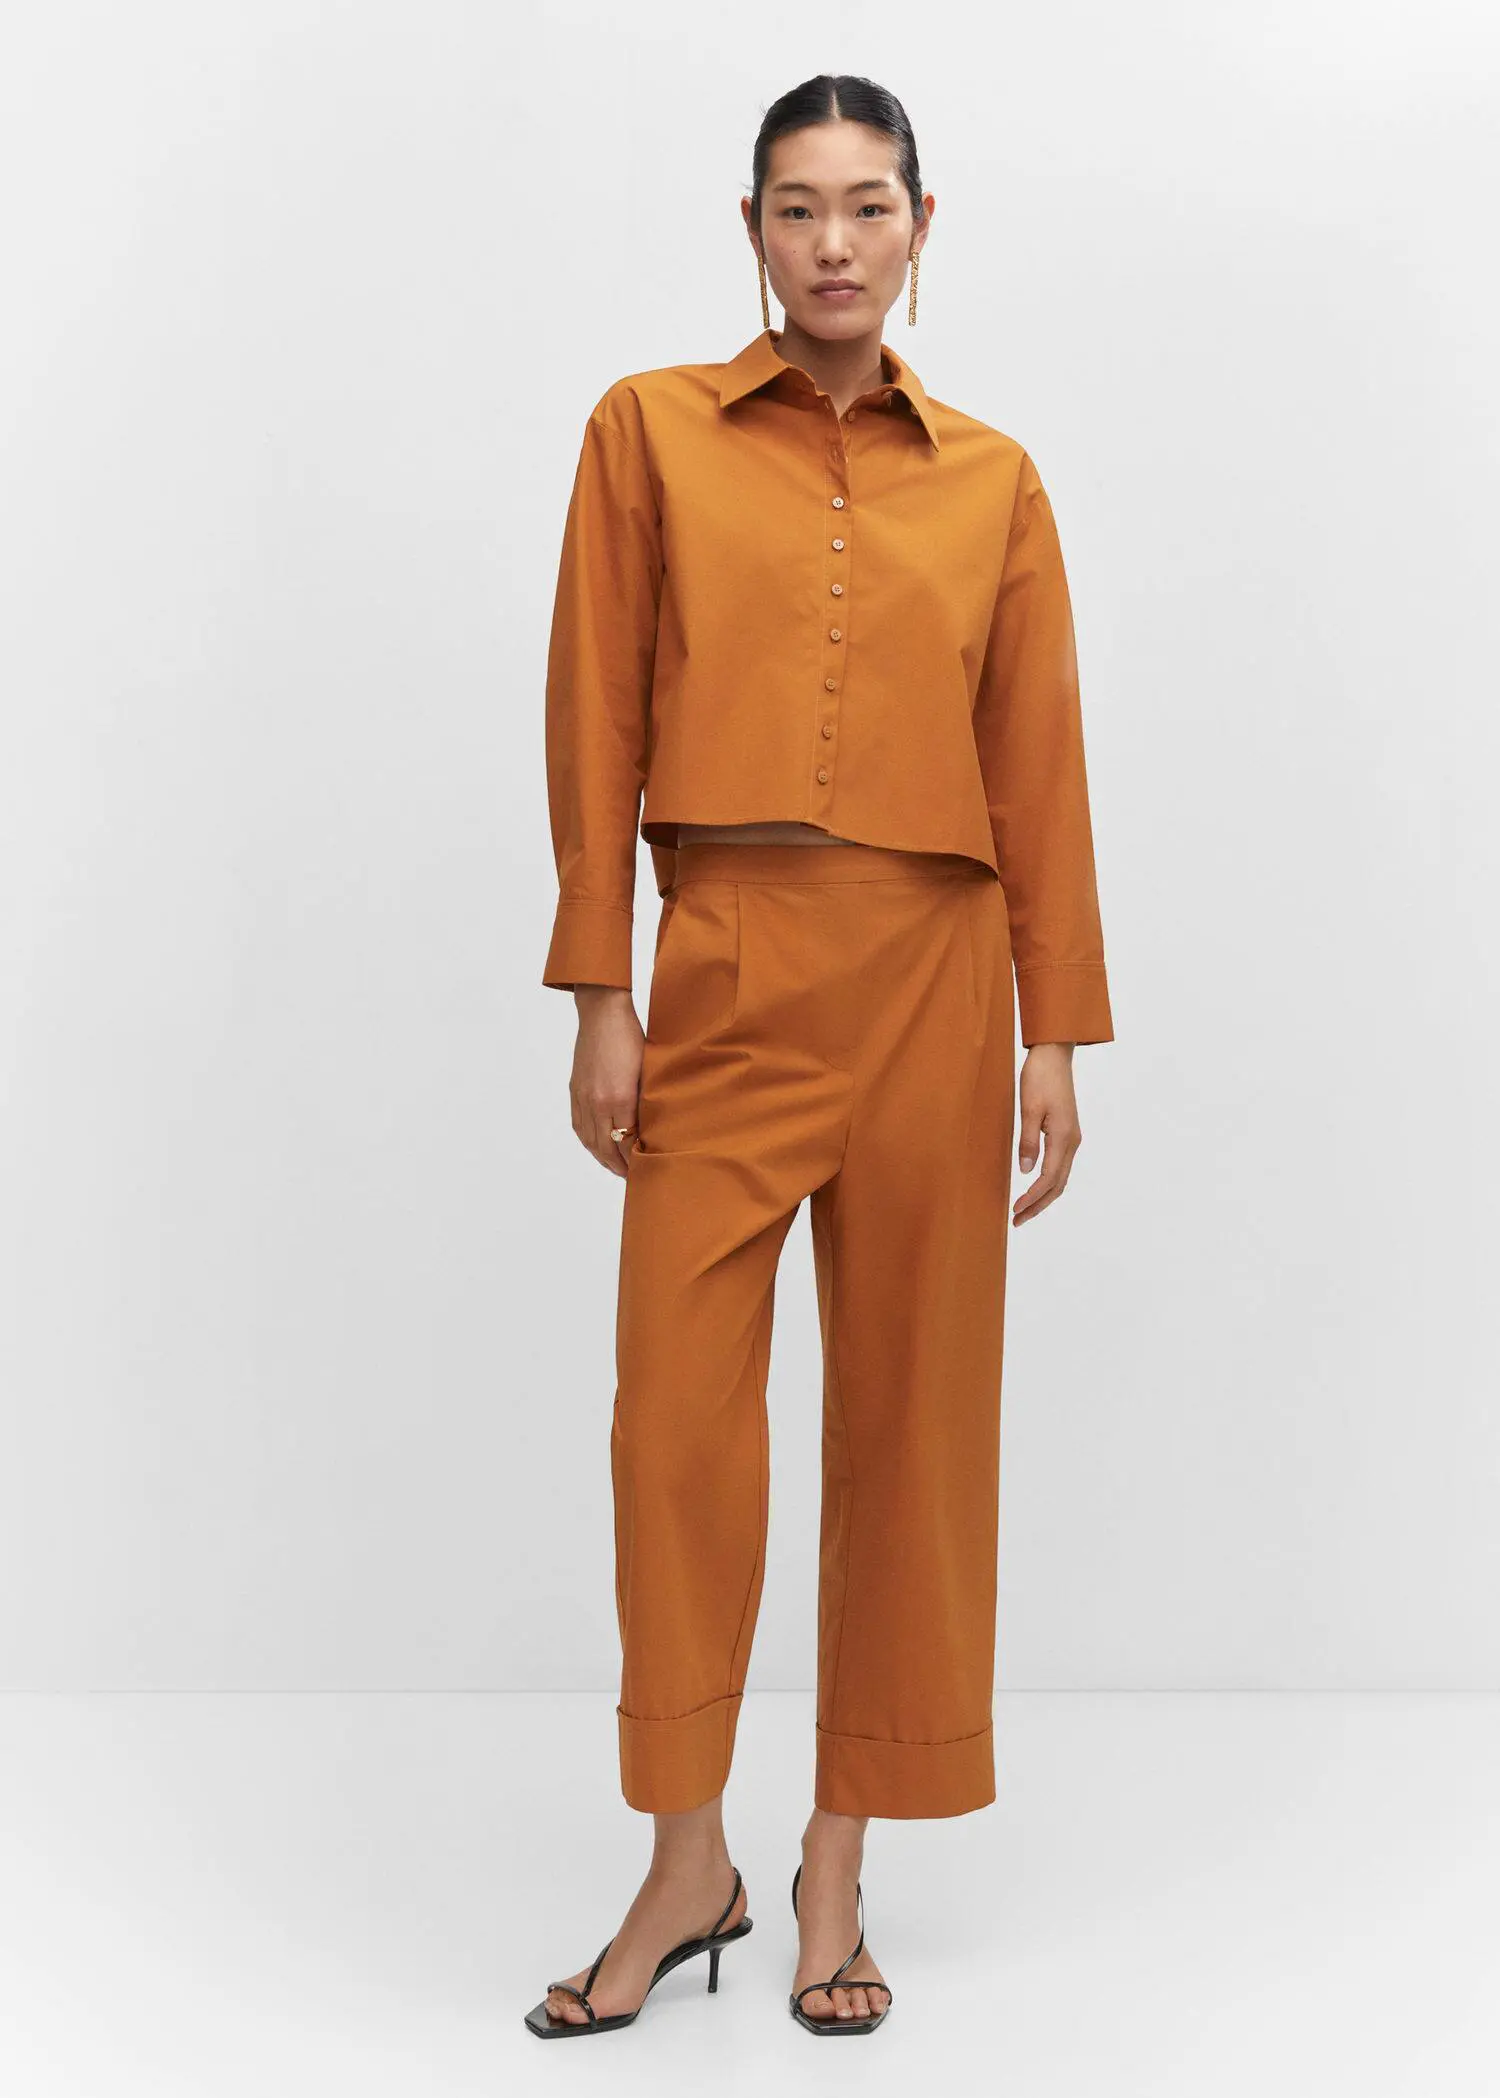 Mango Pleated culottes pants. a person standing in a room wearing a suit. 